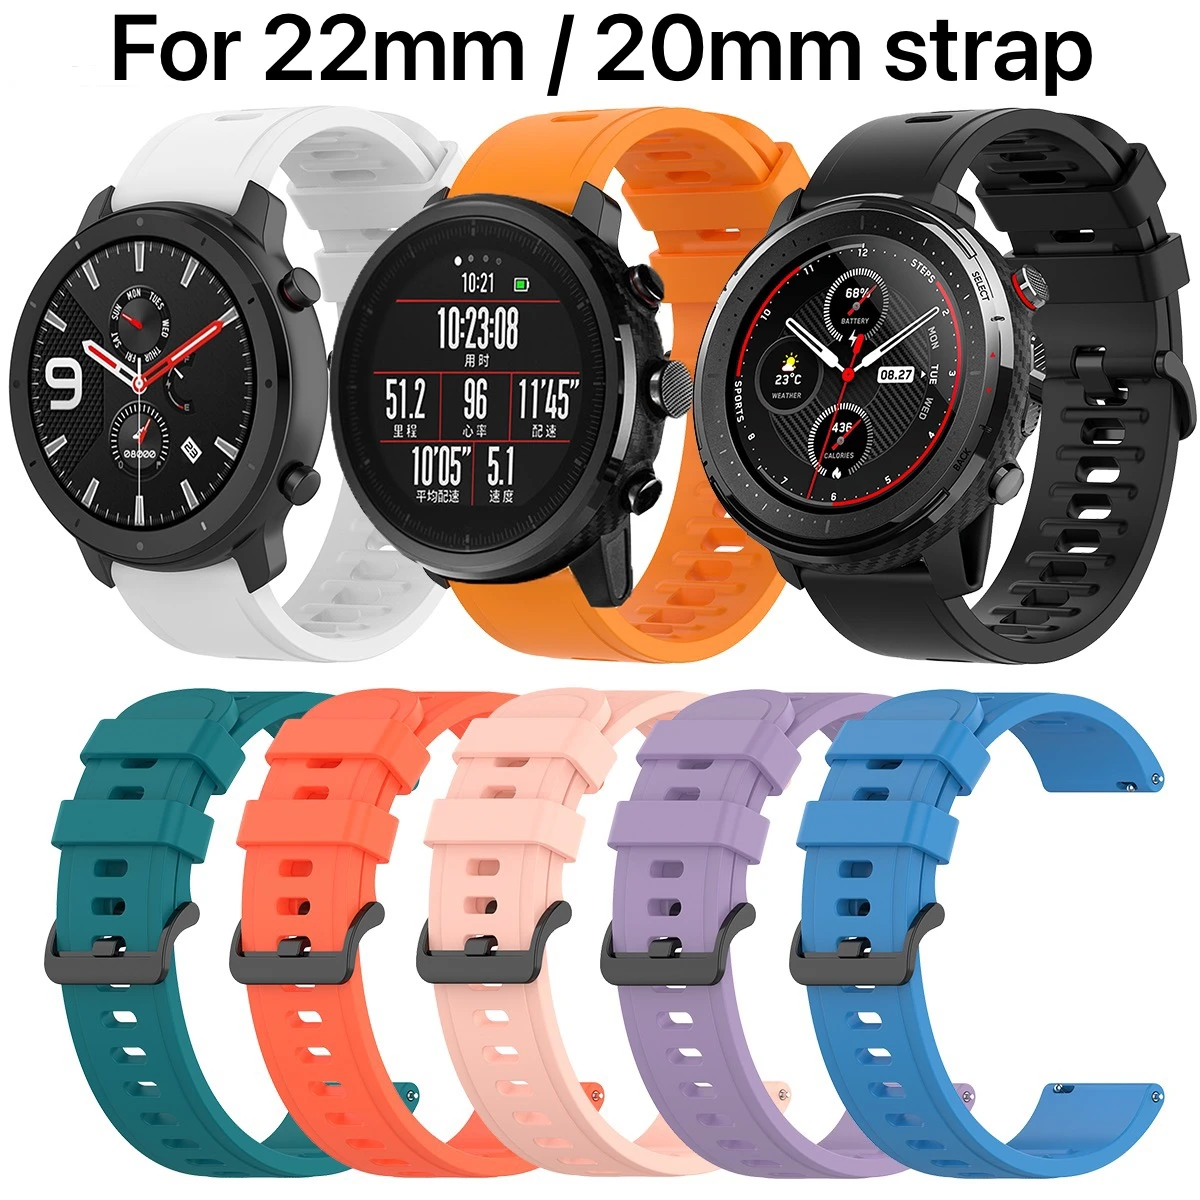 Silicone Strap Compatible with Amazfit GTR 47mm/Samsung watch S3/Huawei watch GTS Replacement bracelet strap for 22MM 20MM strap